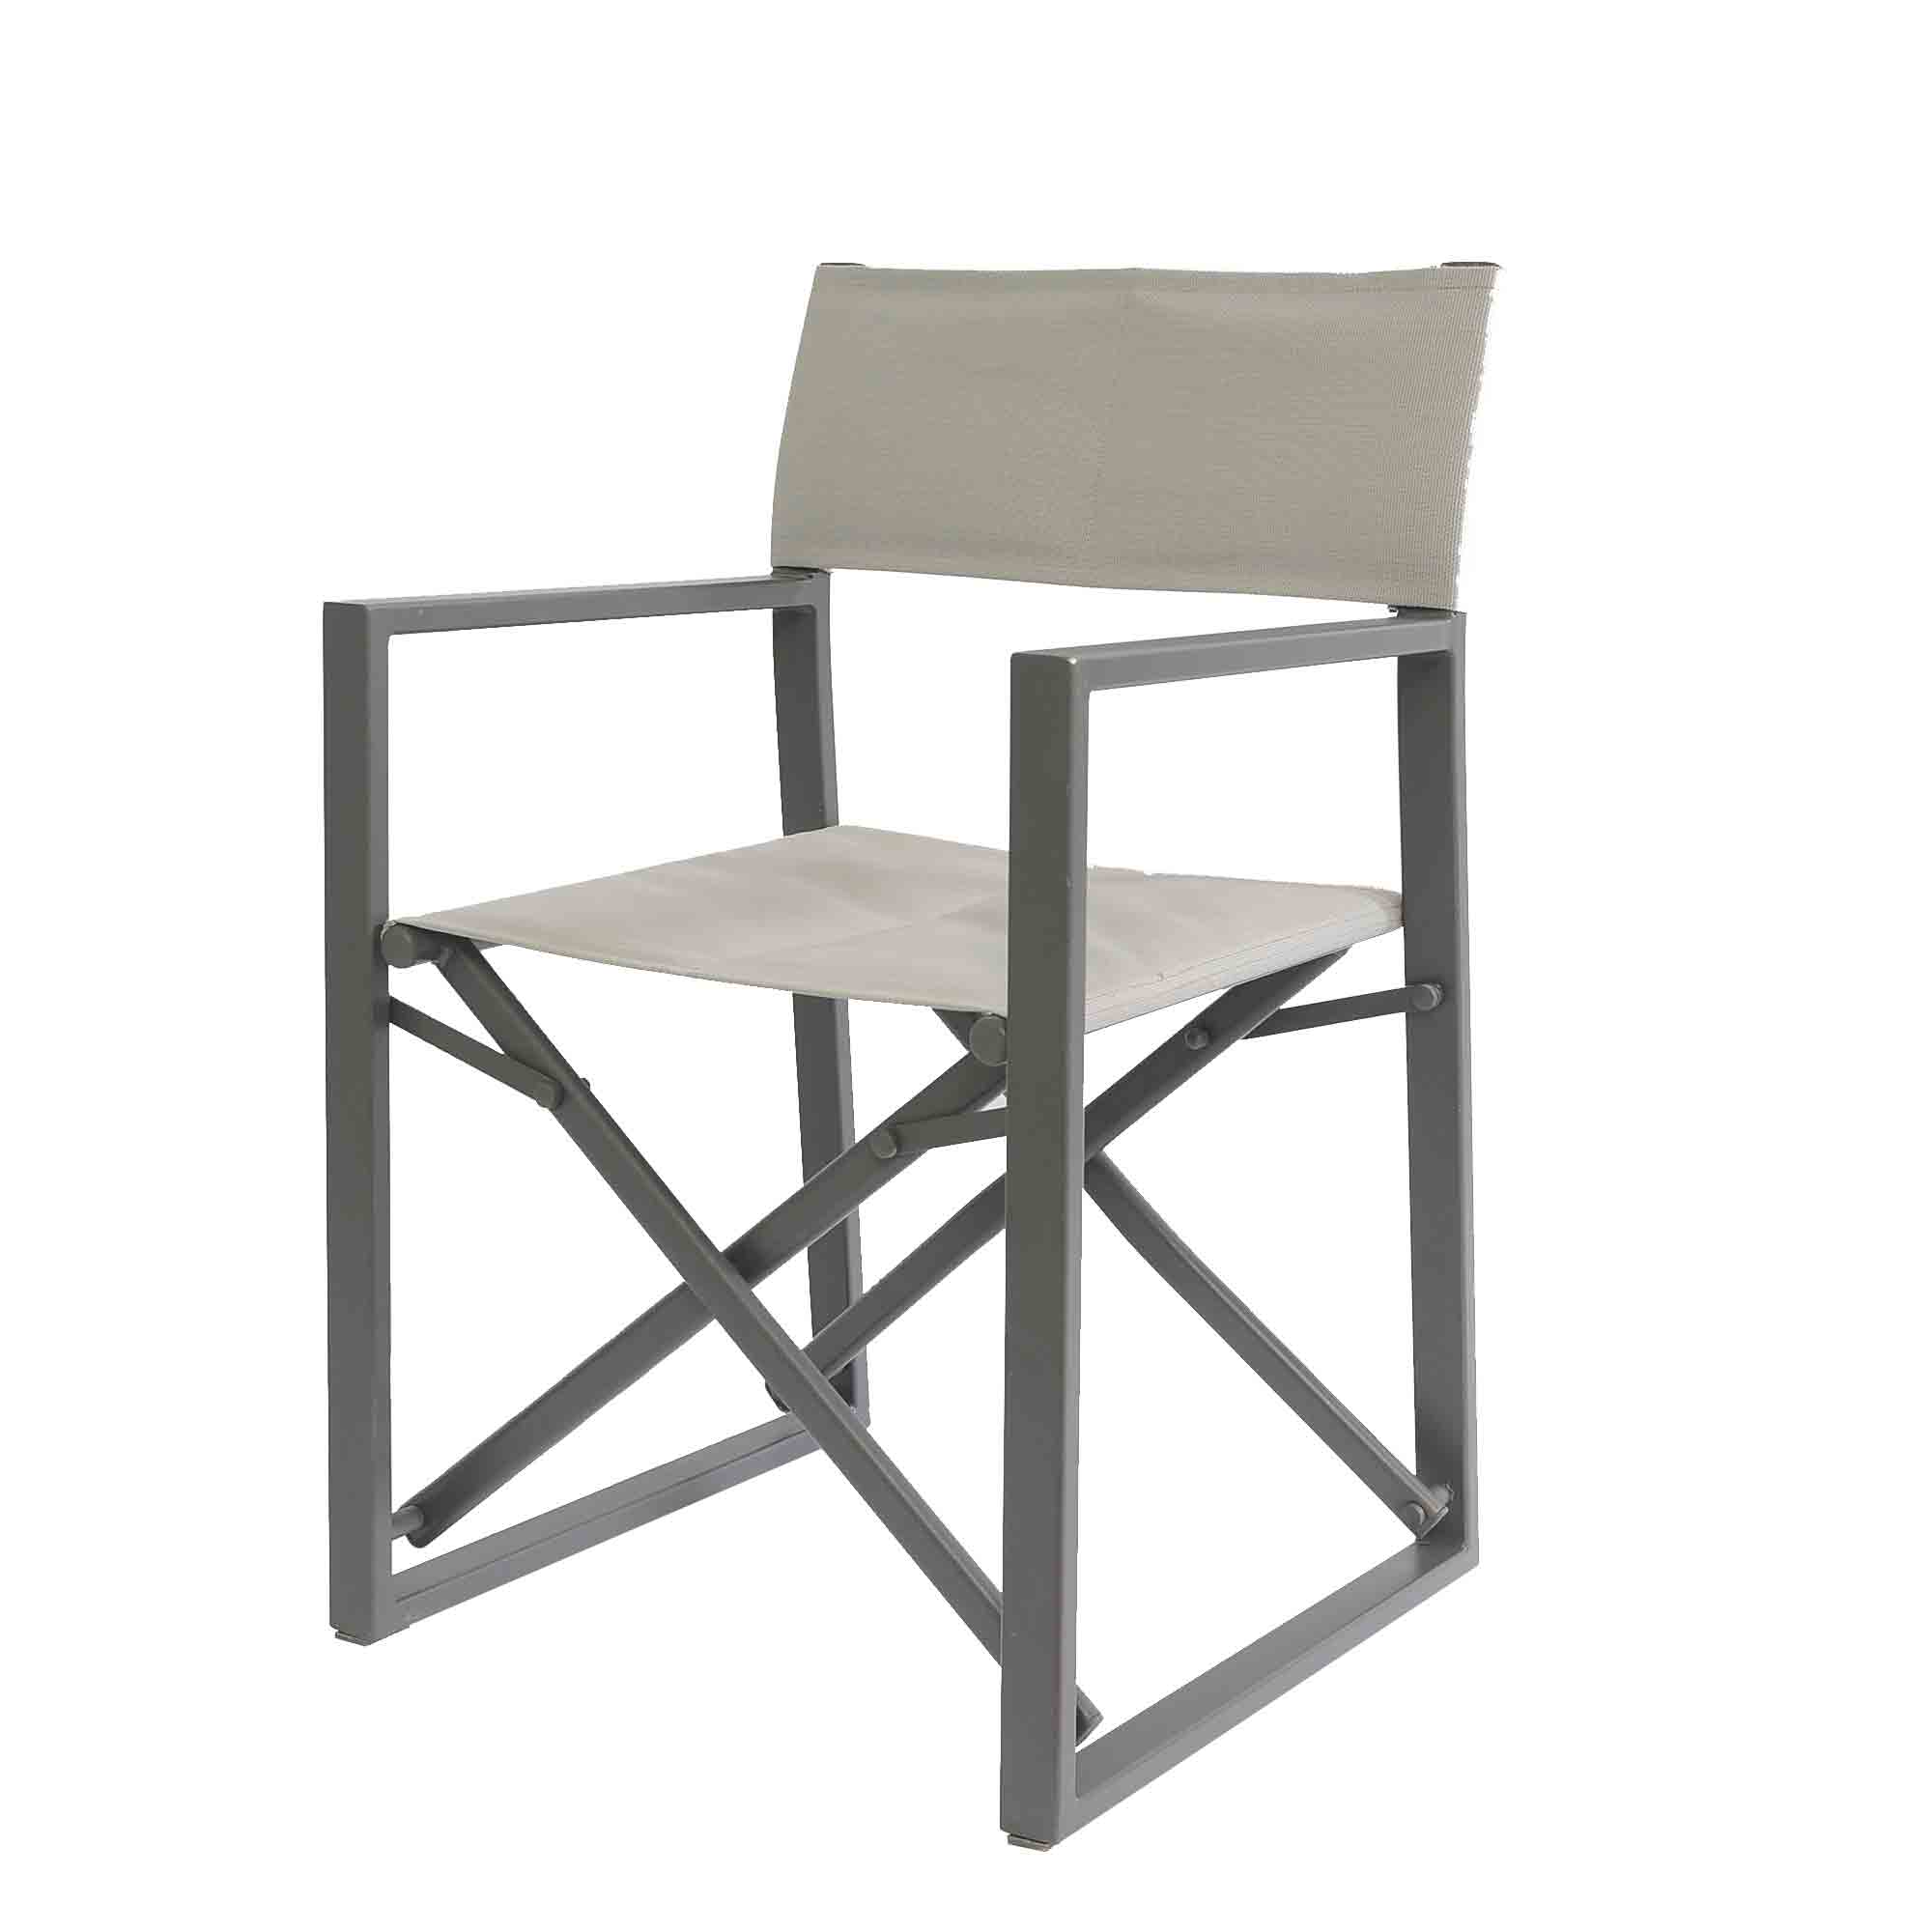 Factory directly Outdoor Table With Cup Holders - JJLXD-011 Aluminum camping folding chair – Jin-jiang Industry